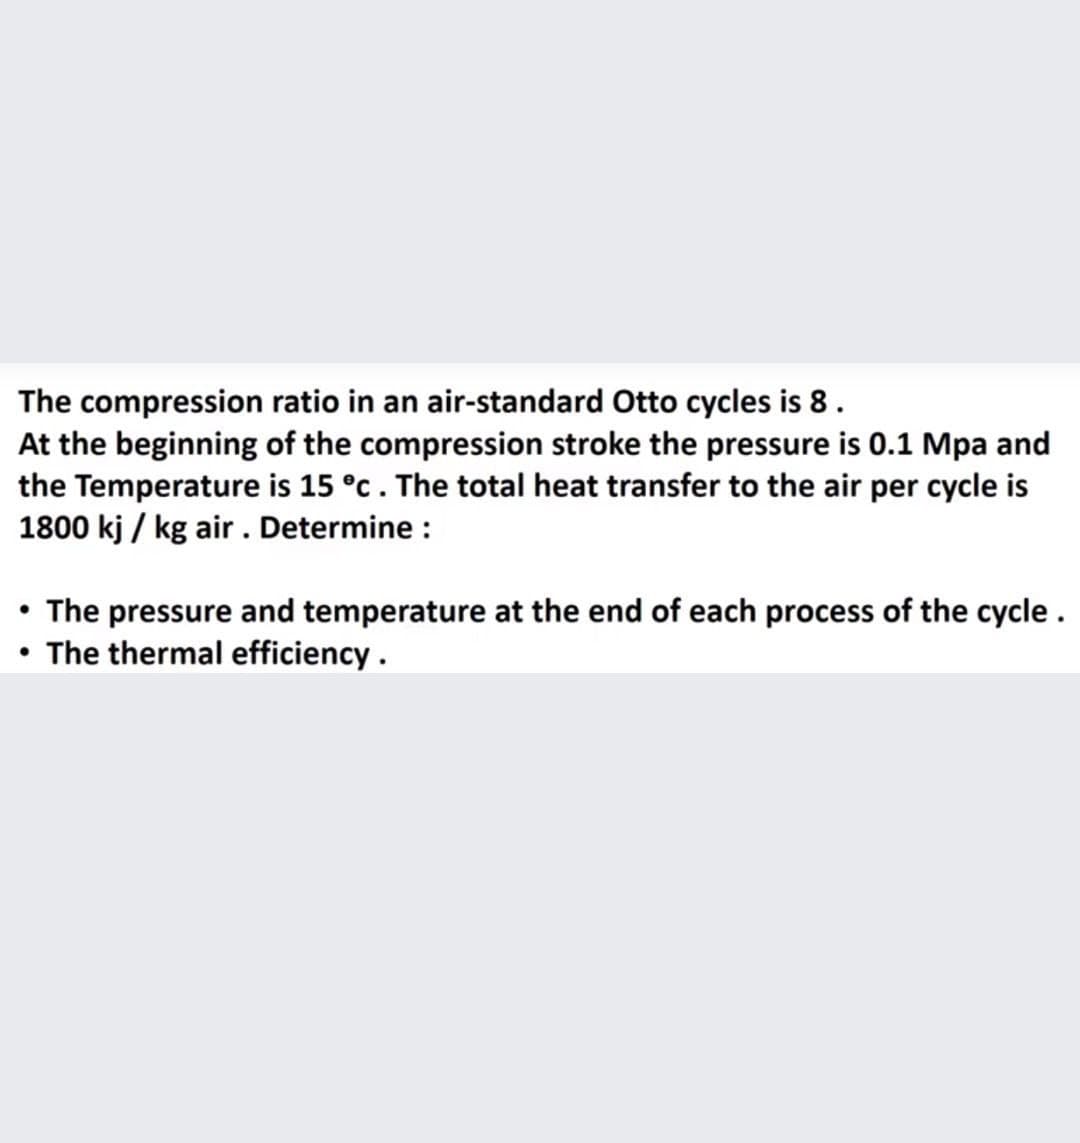 The compression ratio in an air-standard Otto cycles is 8.
At the beginning of the compression stroke the pressure is 0.1 Mpa and
the Temperature is 15 °c. The total heat transfer to the air per cycle is
1800 kj / kg air . Determine :
• The pressure and temperature at the end of each process of the cycle .
• The thermal efficiency.
